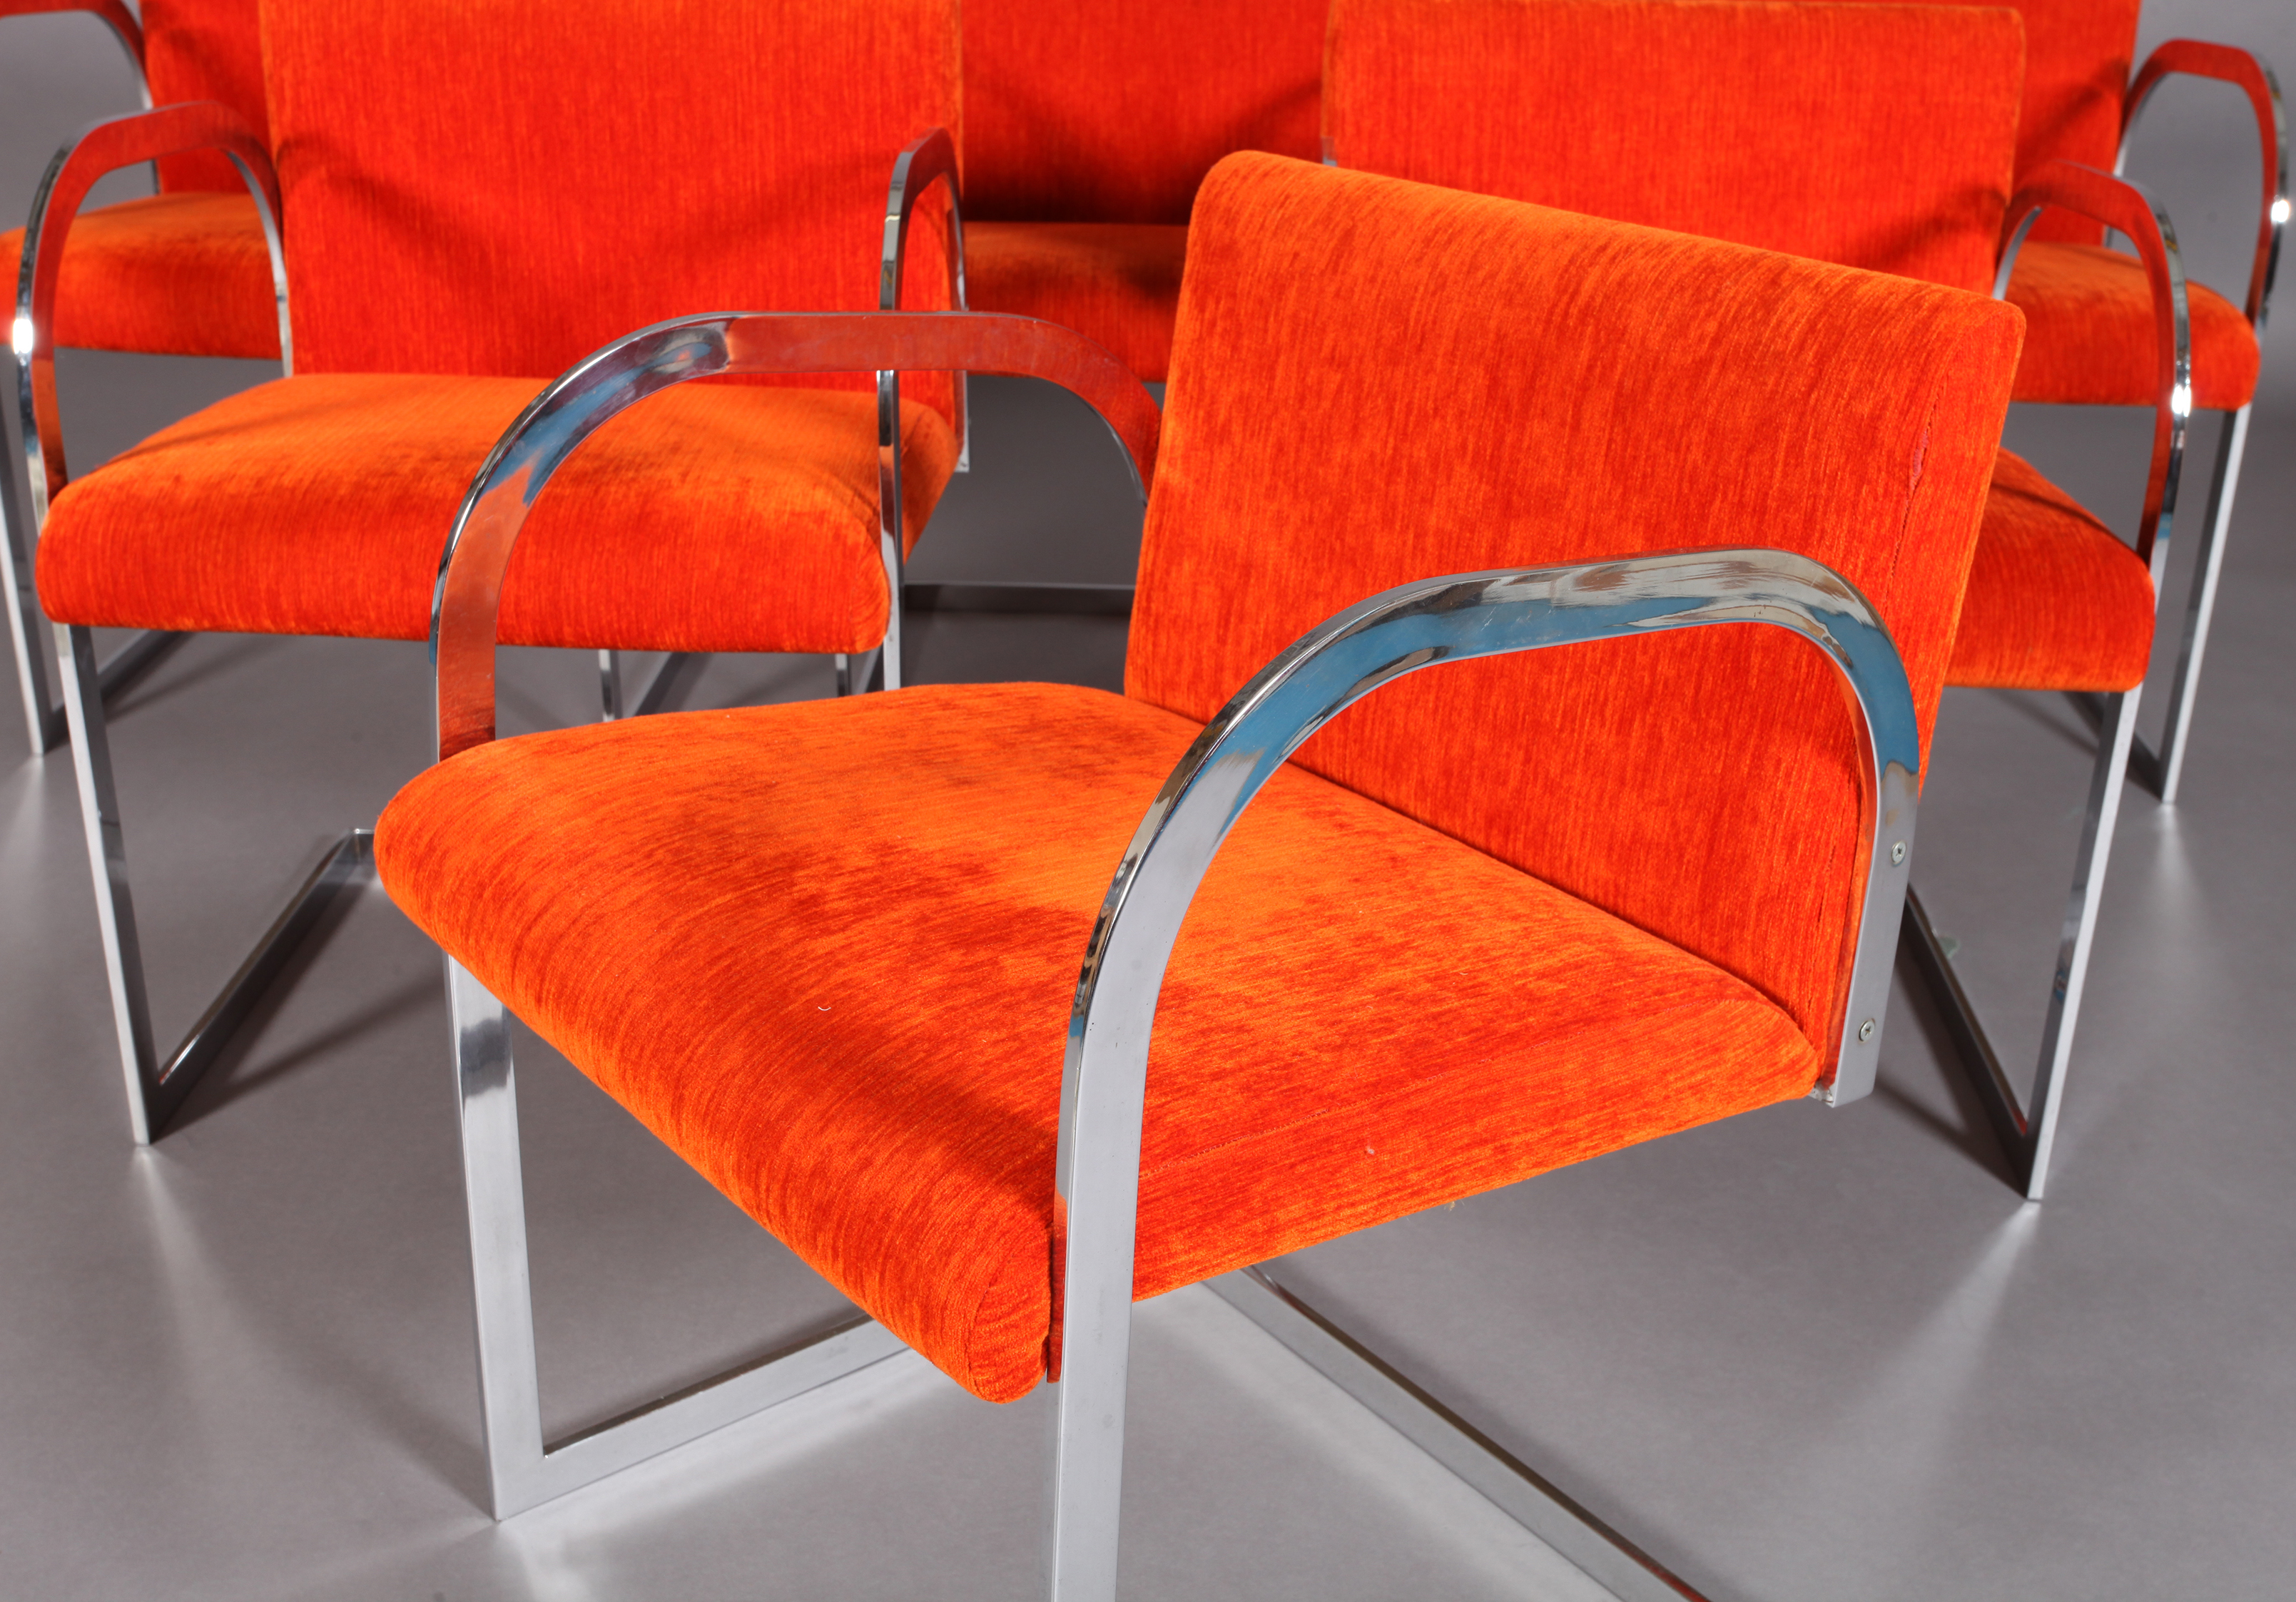 A SET OF SIX ITALIAN CHROMIUM PLATED STEEL CANTILEVER DINING CHAIRS, c.1970, with arch-profile arms, - Image 3 of 5